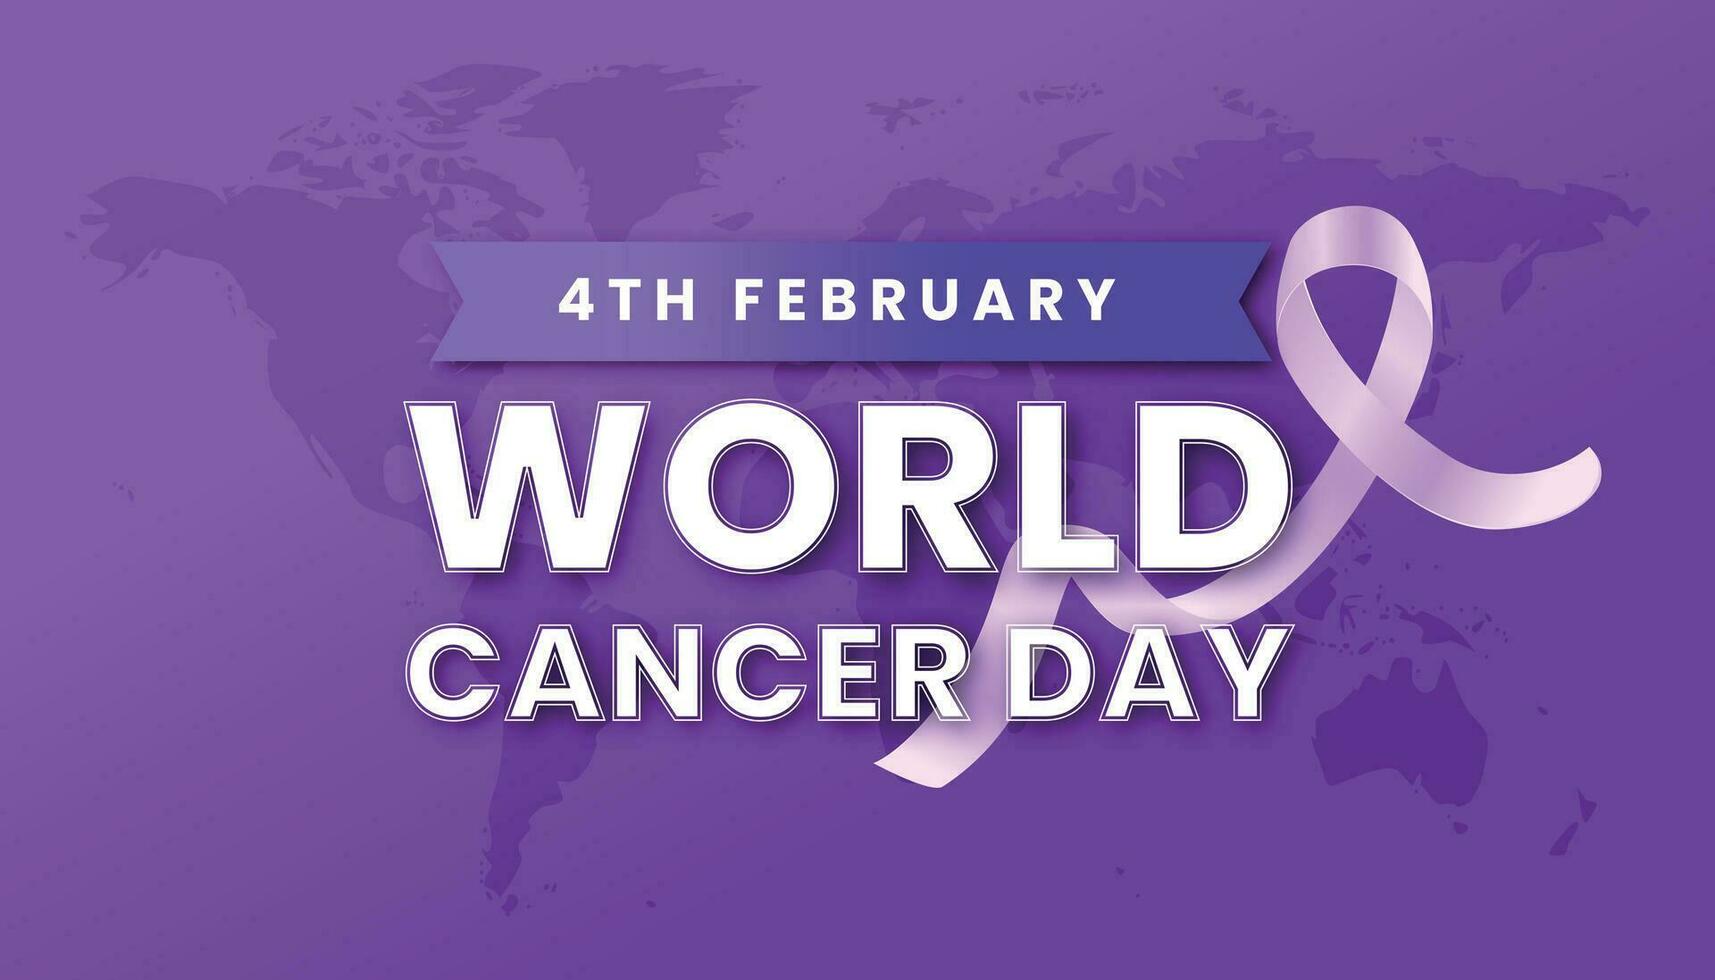 World Cancer Day. Calligraphy Poster Design. Realistic Lavender Ribbon. February 4 th is Cancer Awareness Day. Vector Illustration